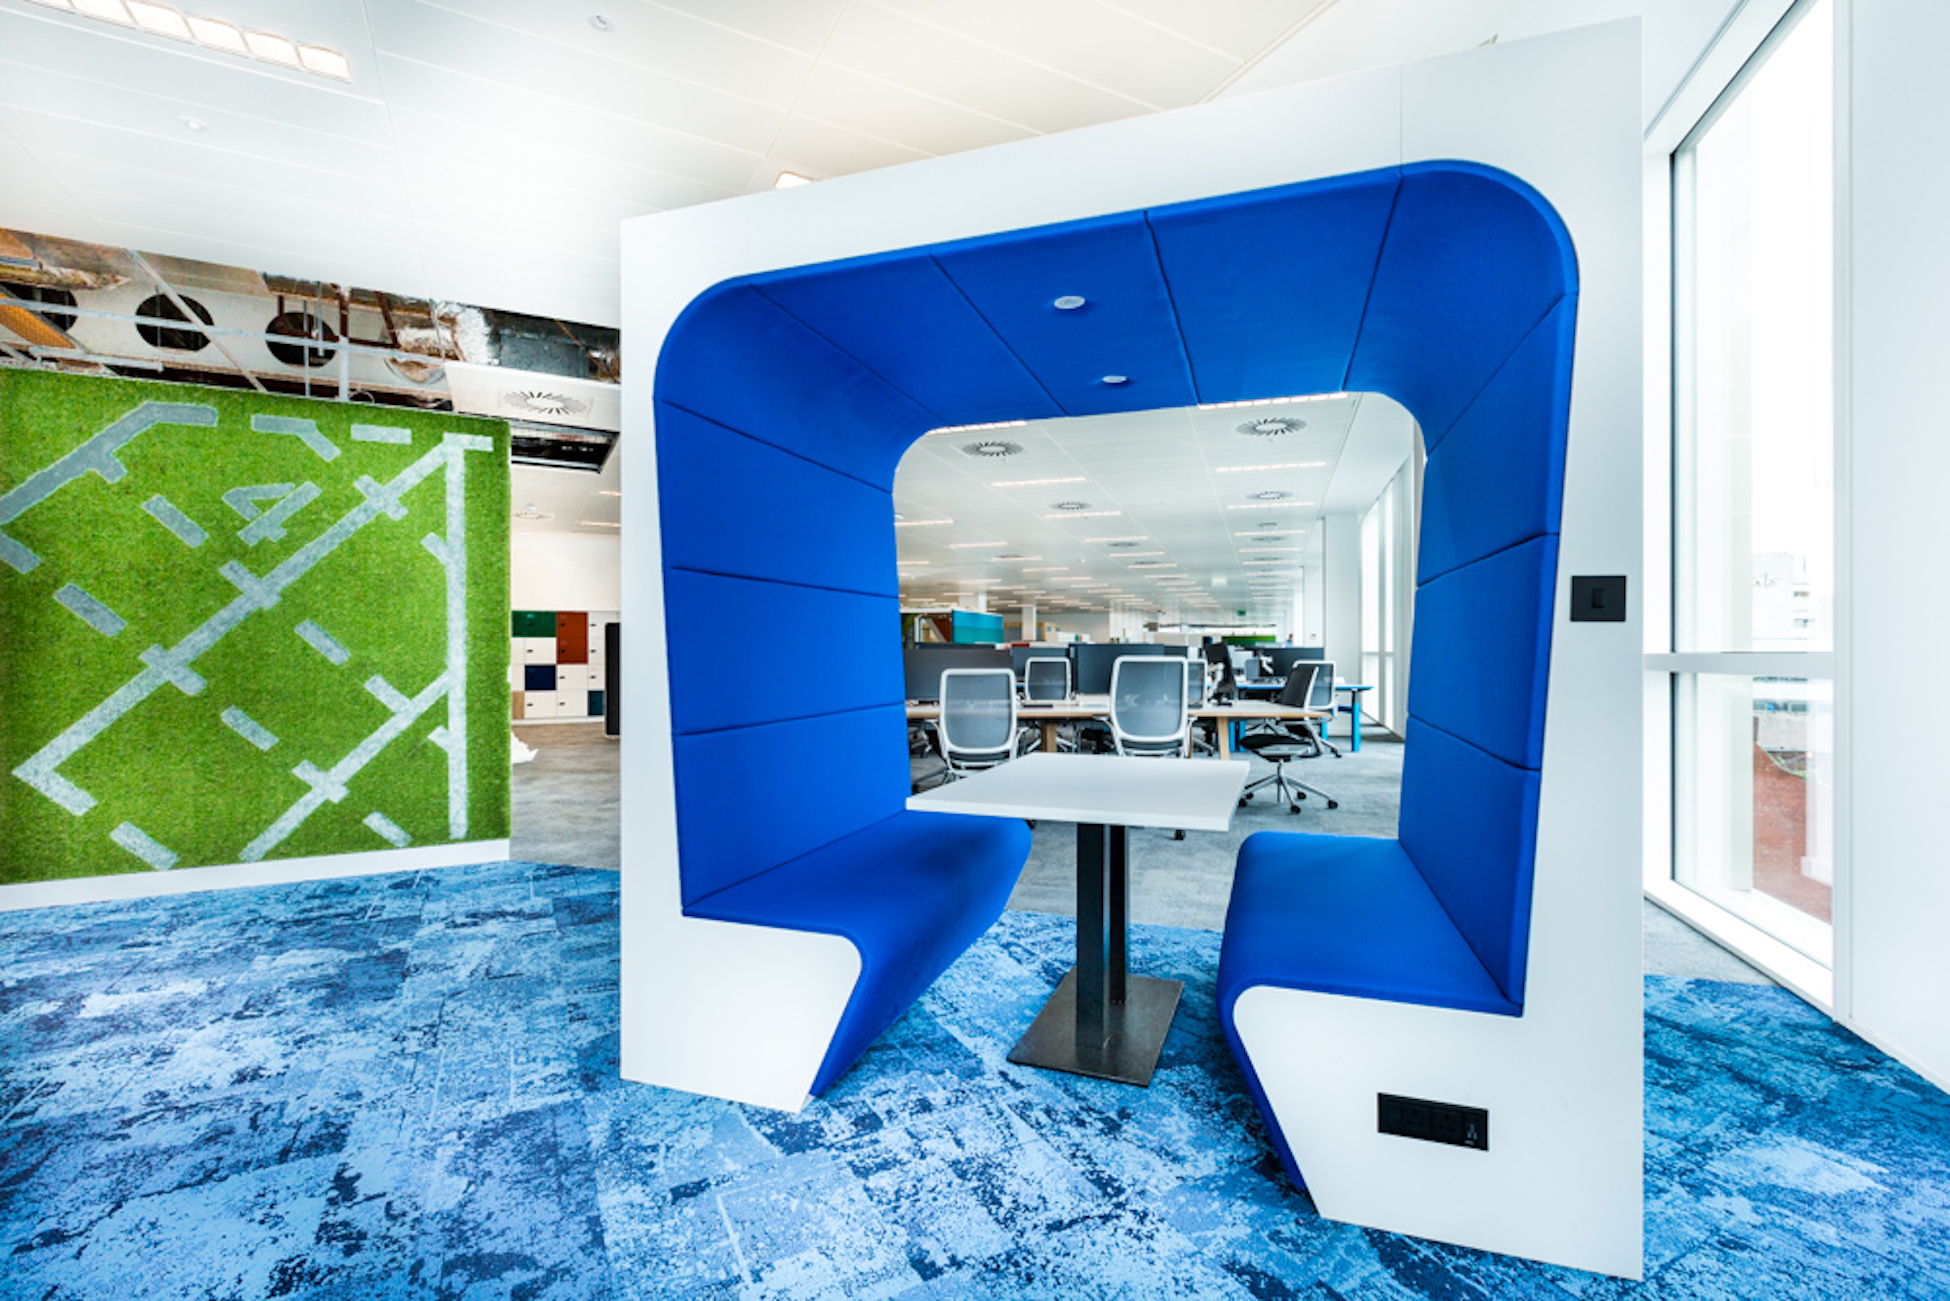 Workagile Snug meeting booth shown in white and blue in an office setting